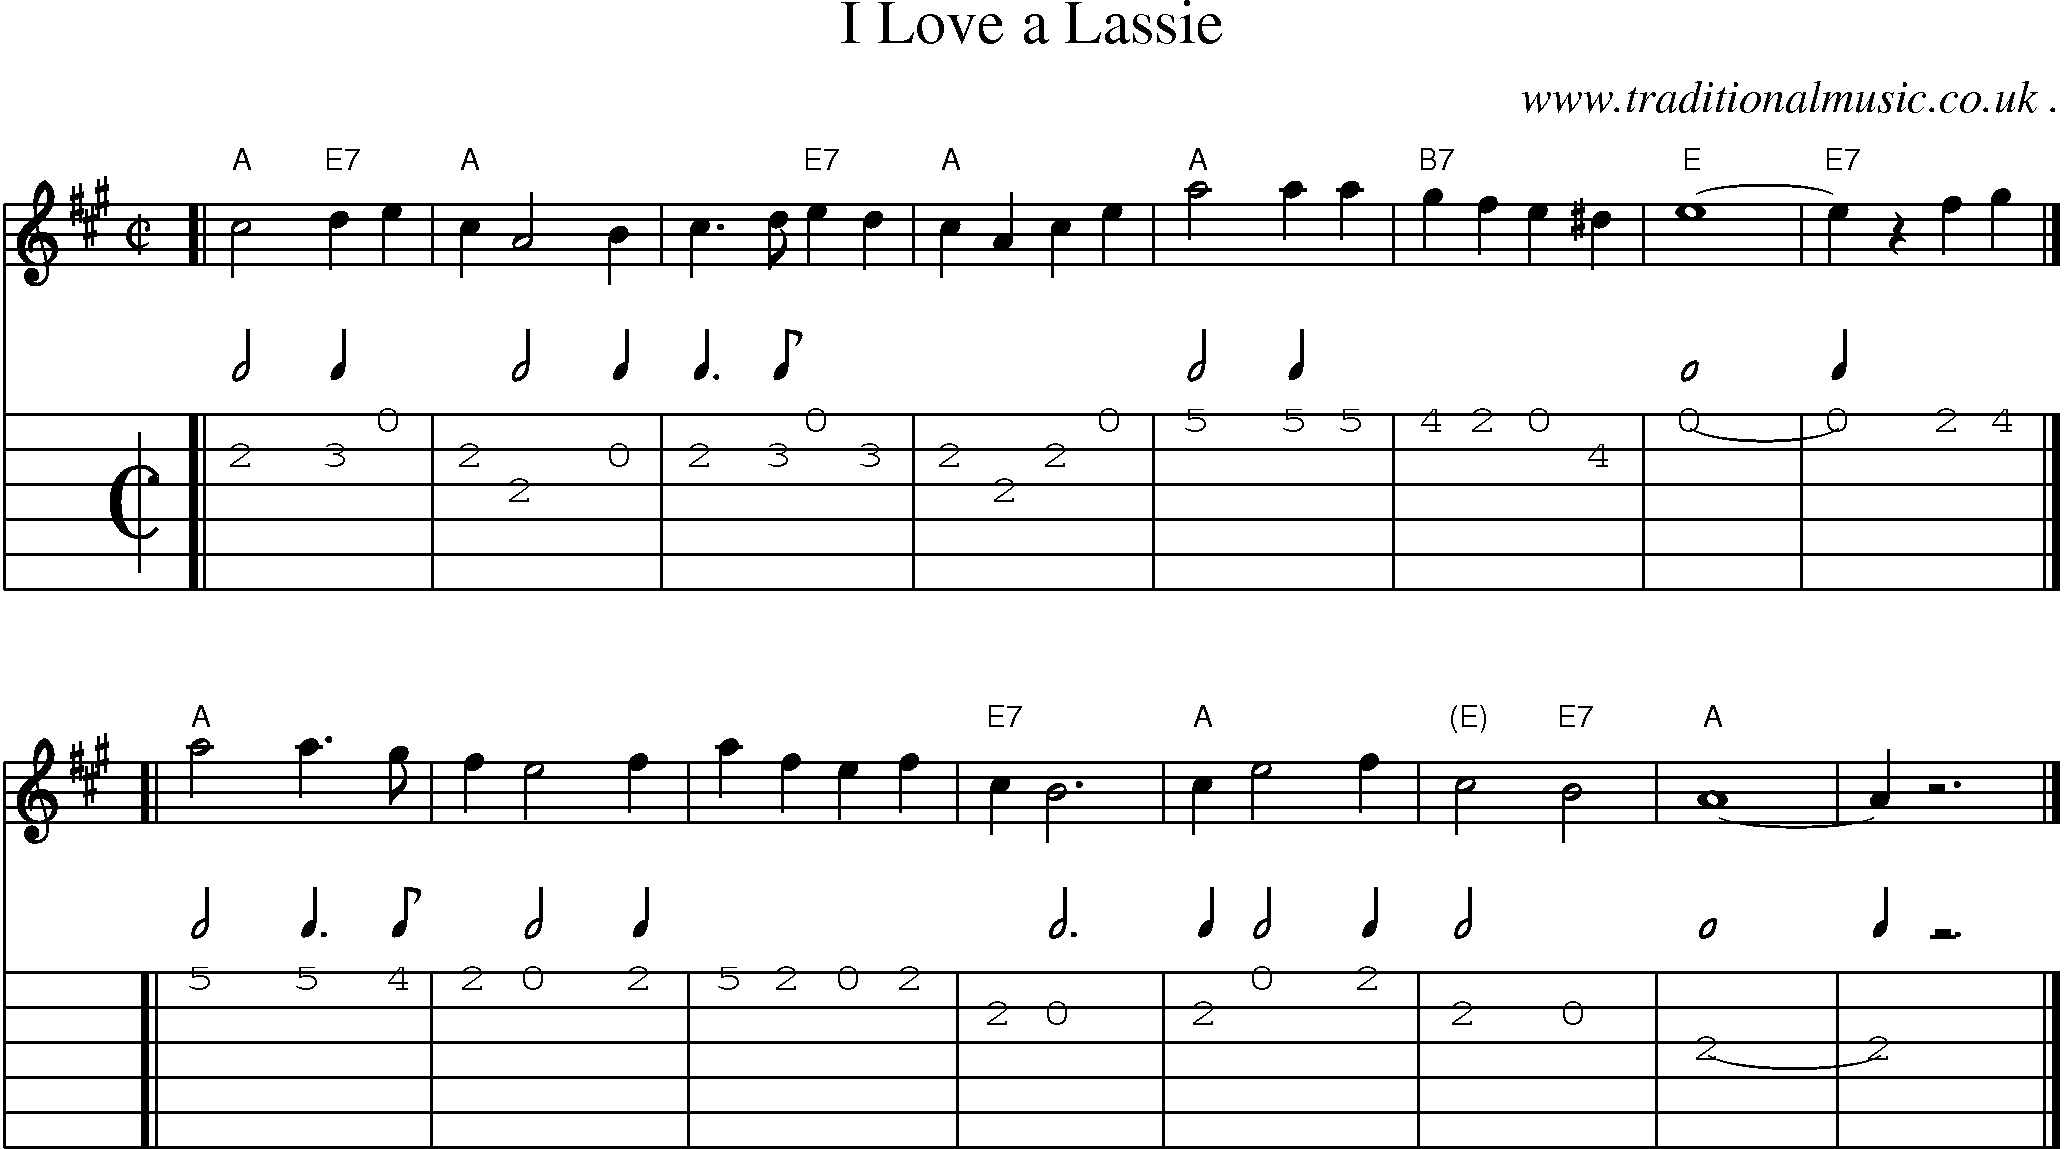 Sheet-music  score, Chords and Guitar Tabs for I Love A Lassie